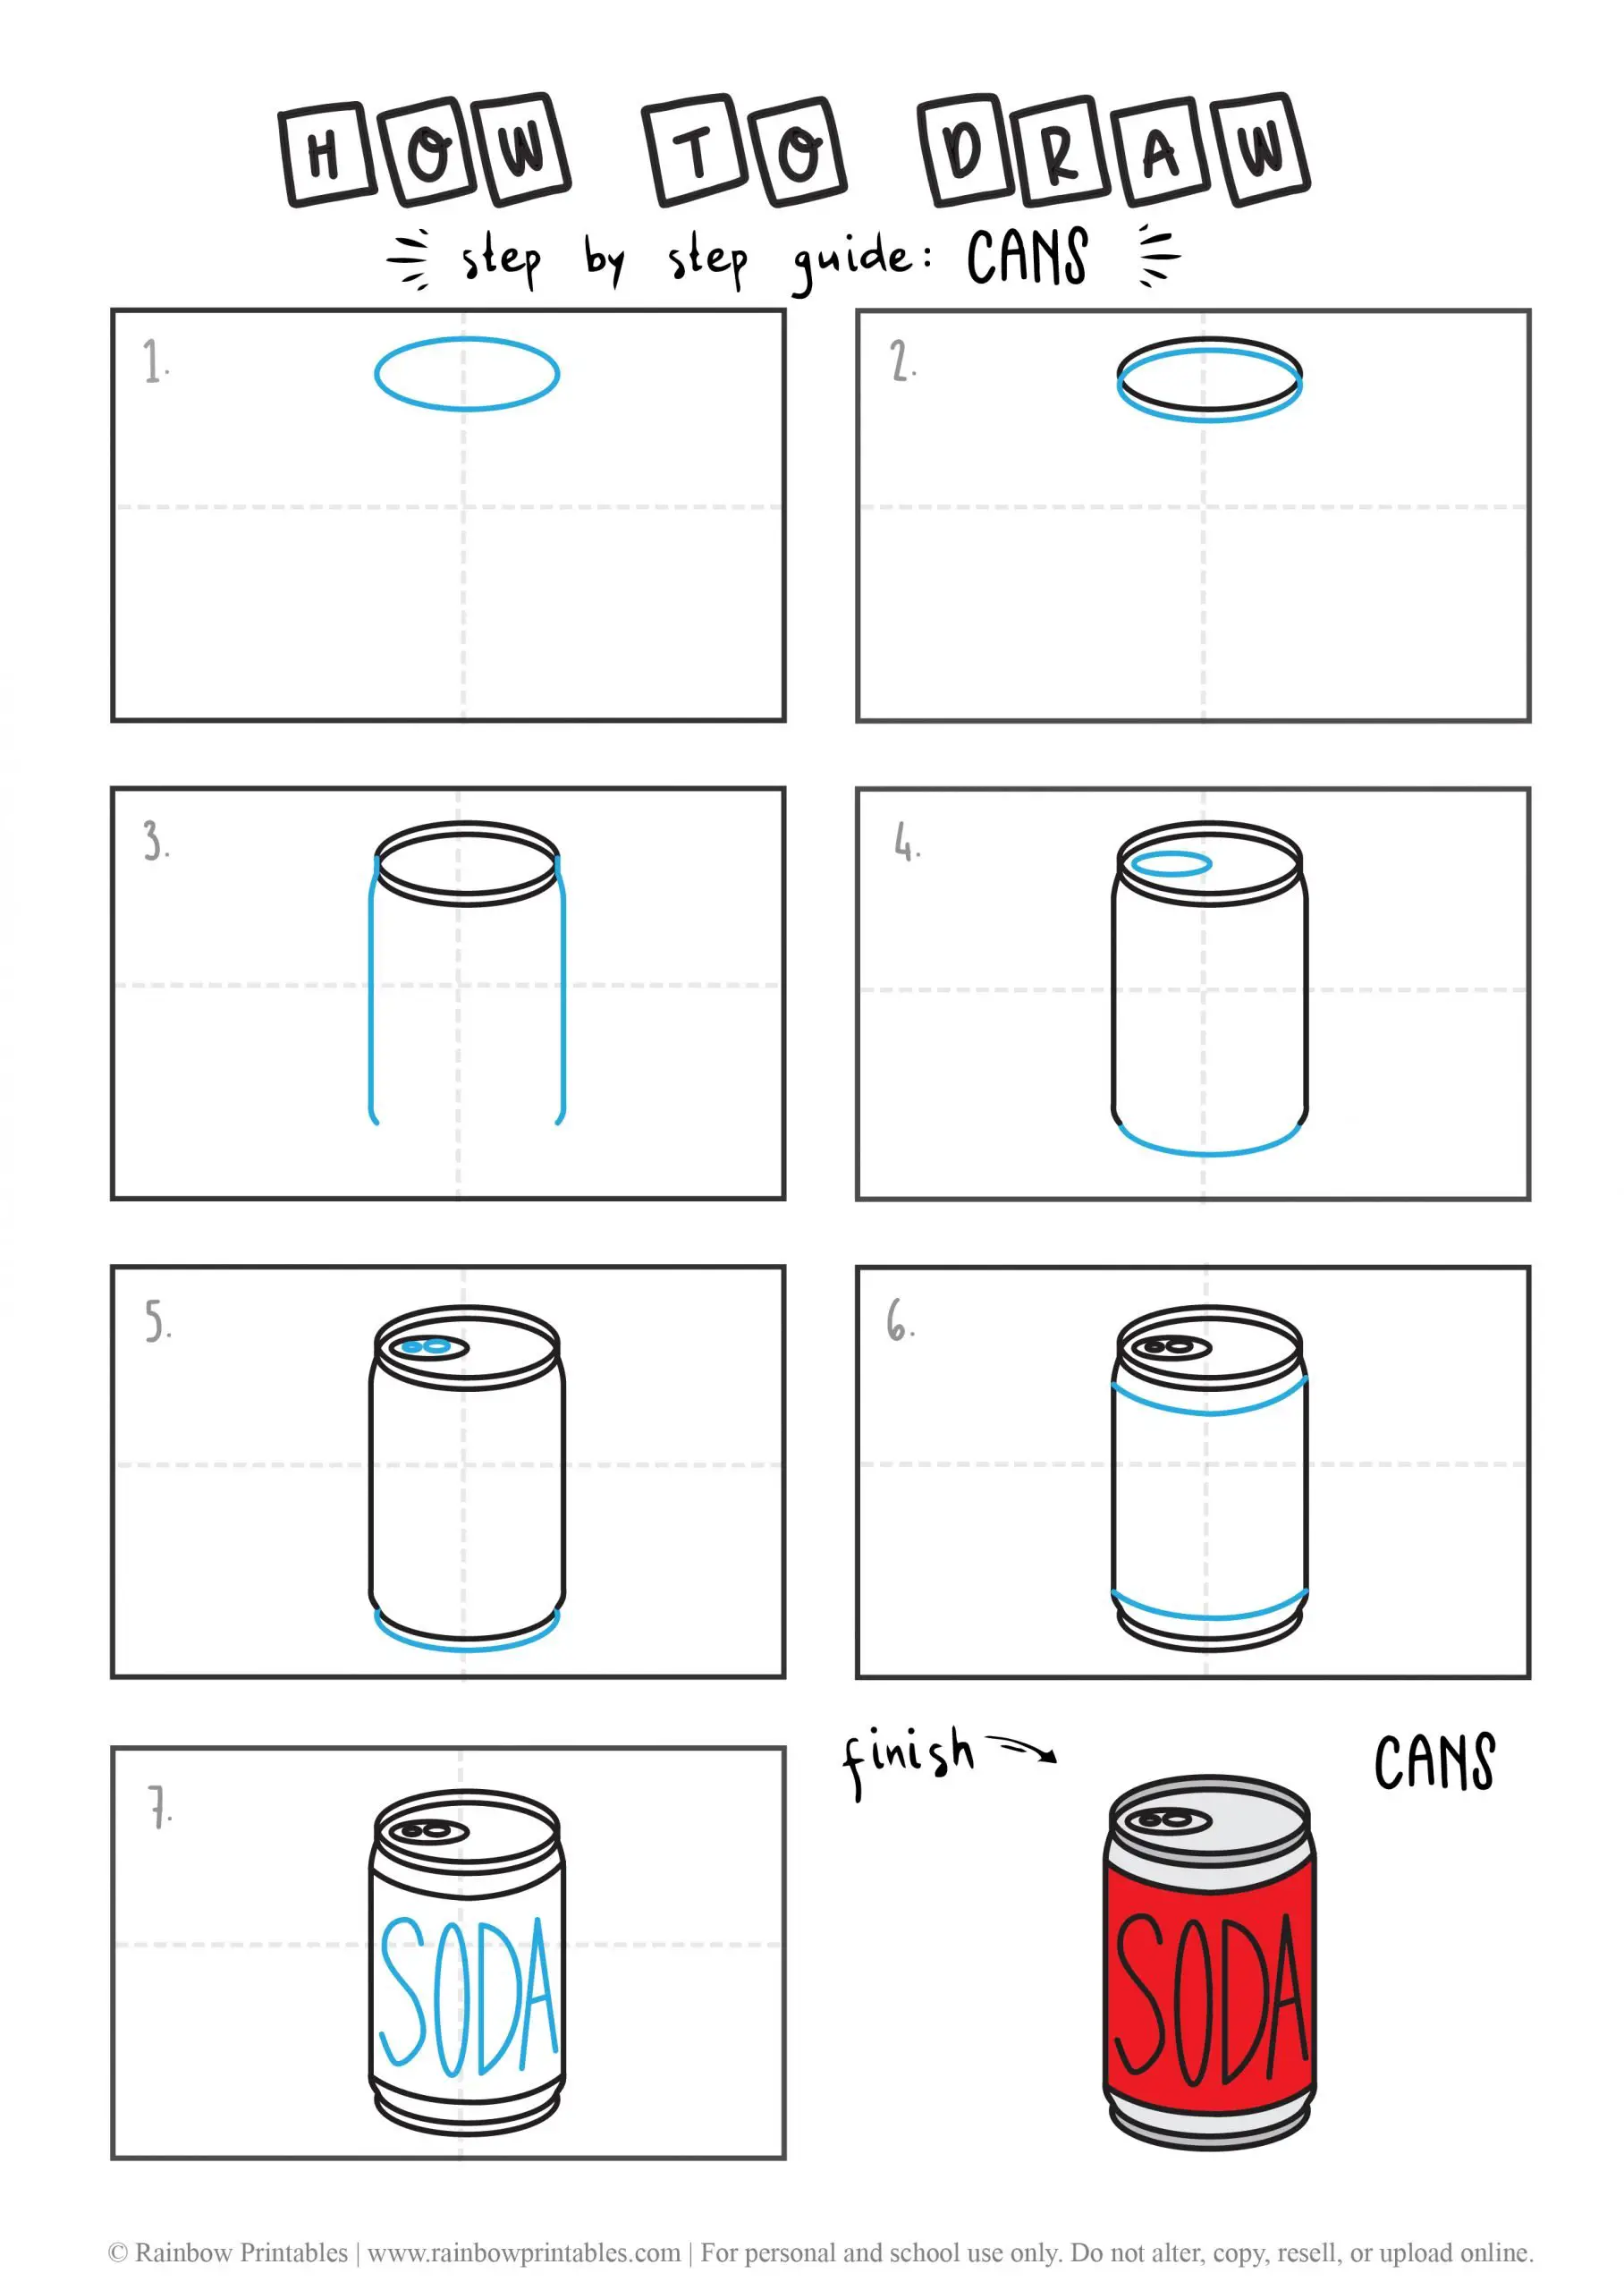 HOW TO DRAW A SODA CAN GUIDE ILLUSTRATION STEP BY STEP EASY SIMPLE FOR KIDS